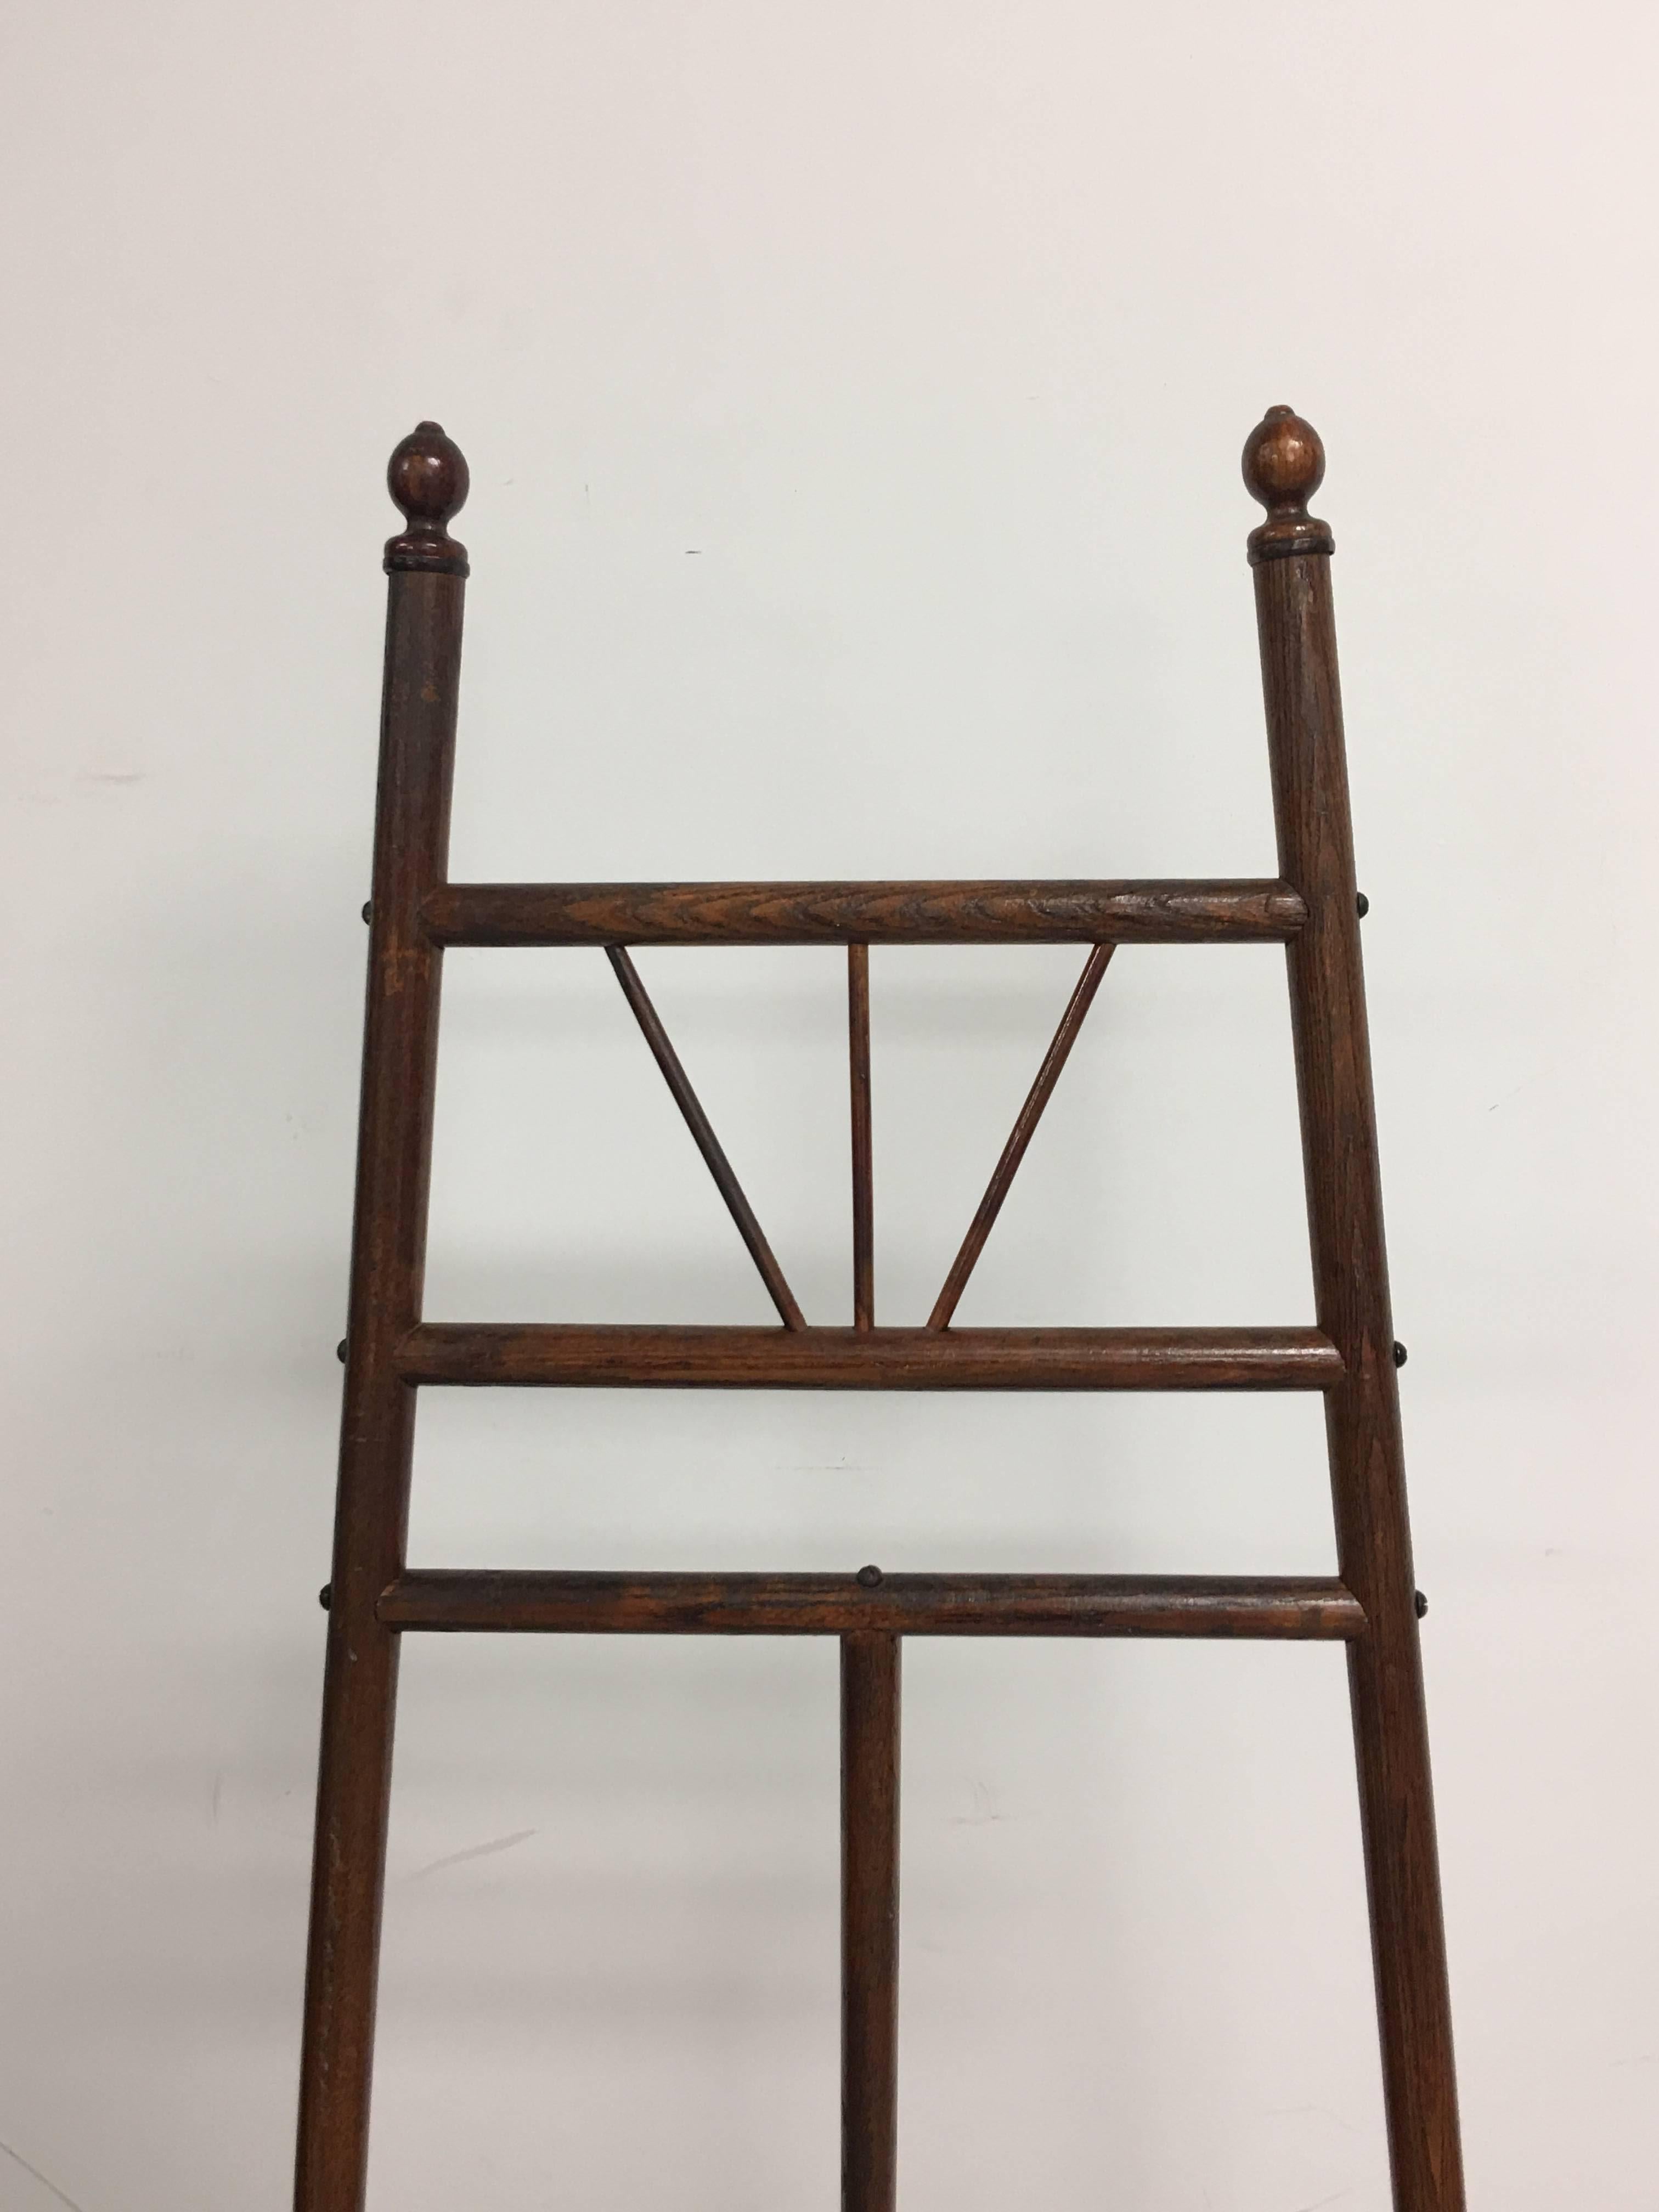 Offered is a stunning, late 19th century, oak easel. Extremely sturdy. Looks as if it's never been used.